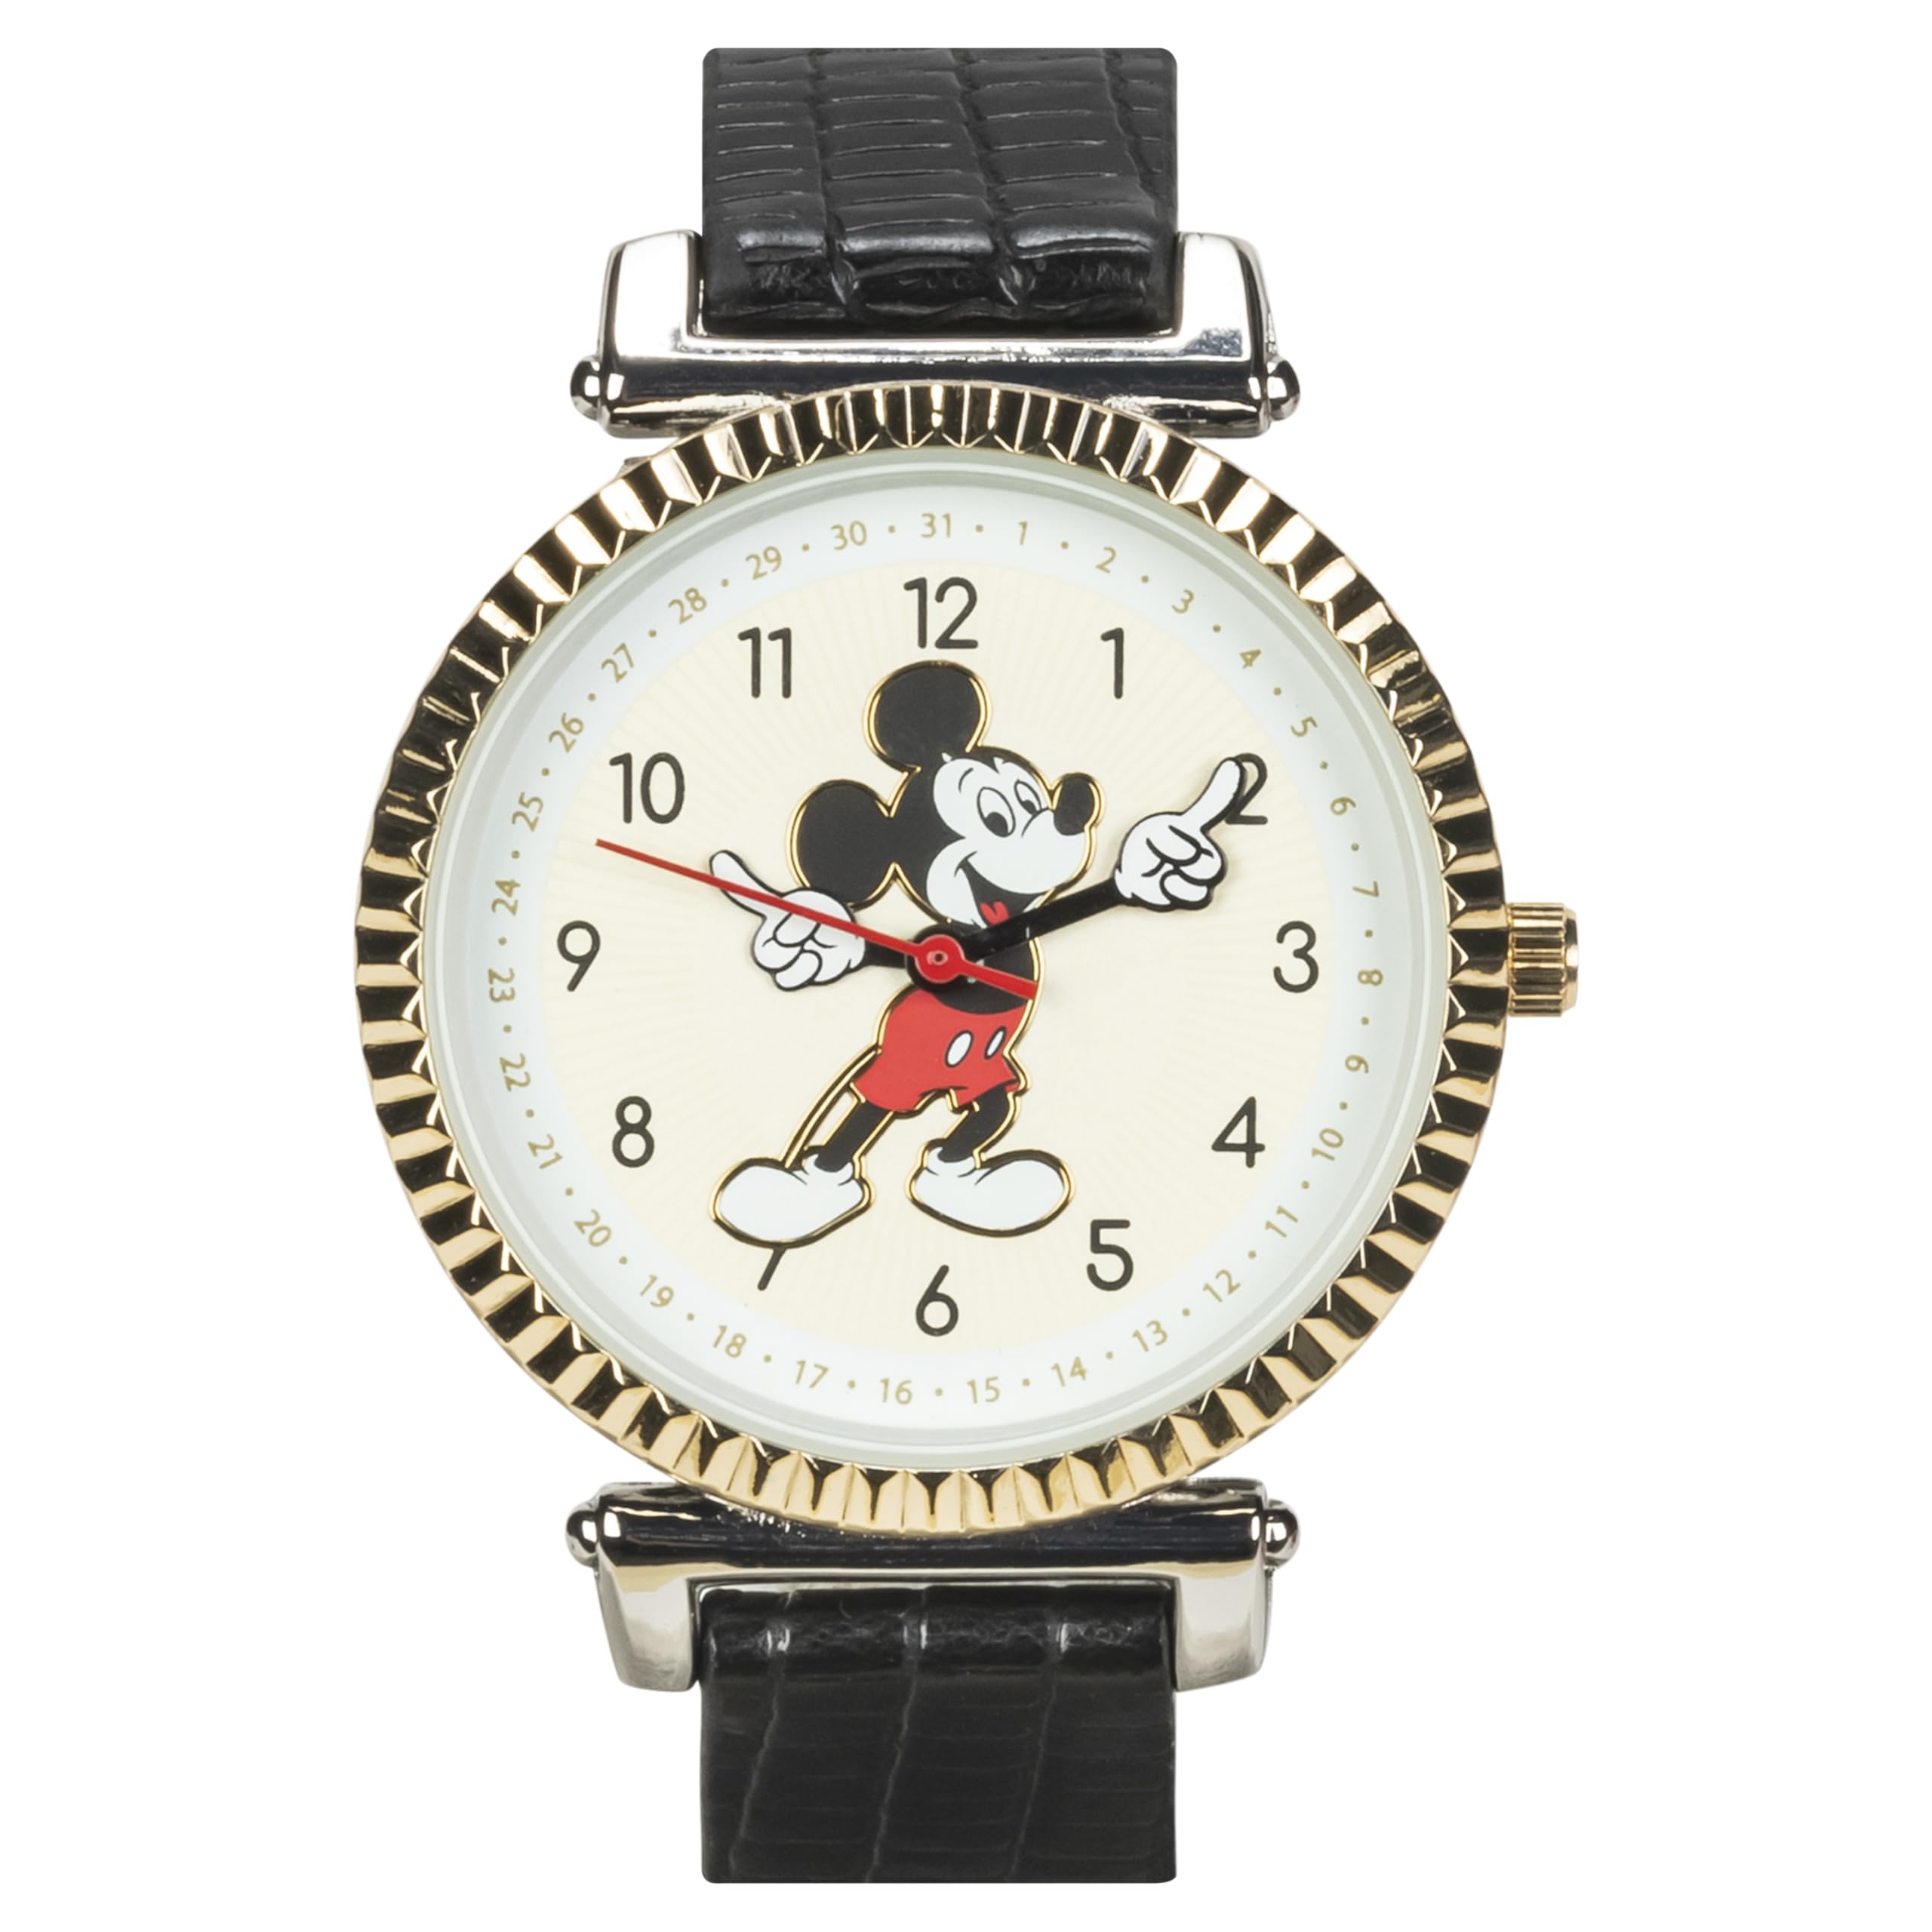 Accutime Disney 100 Mickey Mouse Black Analog Watch for Men, Adults with Leather Band - Japanese Quartz Movement (Model: MK5571AZ)